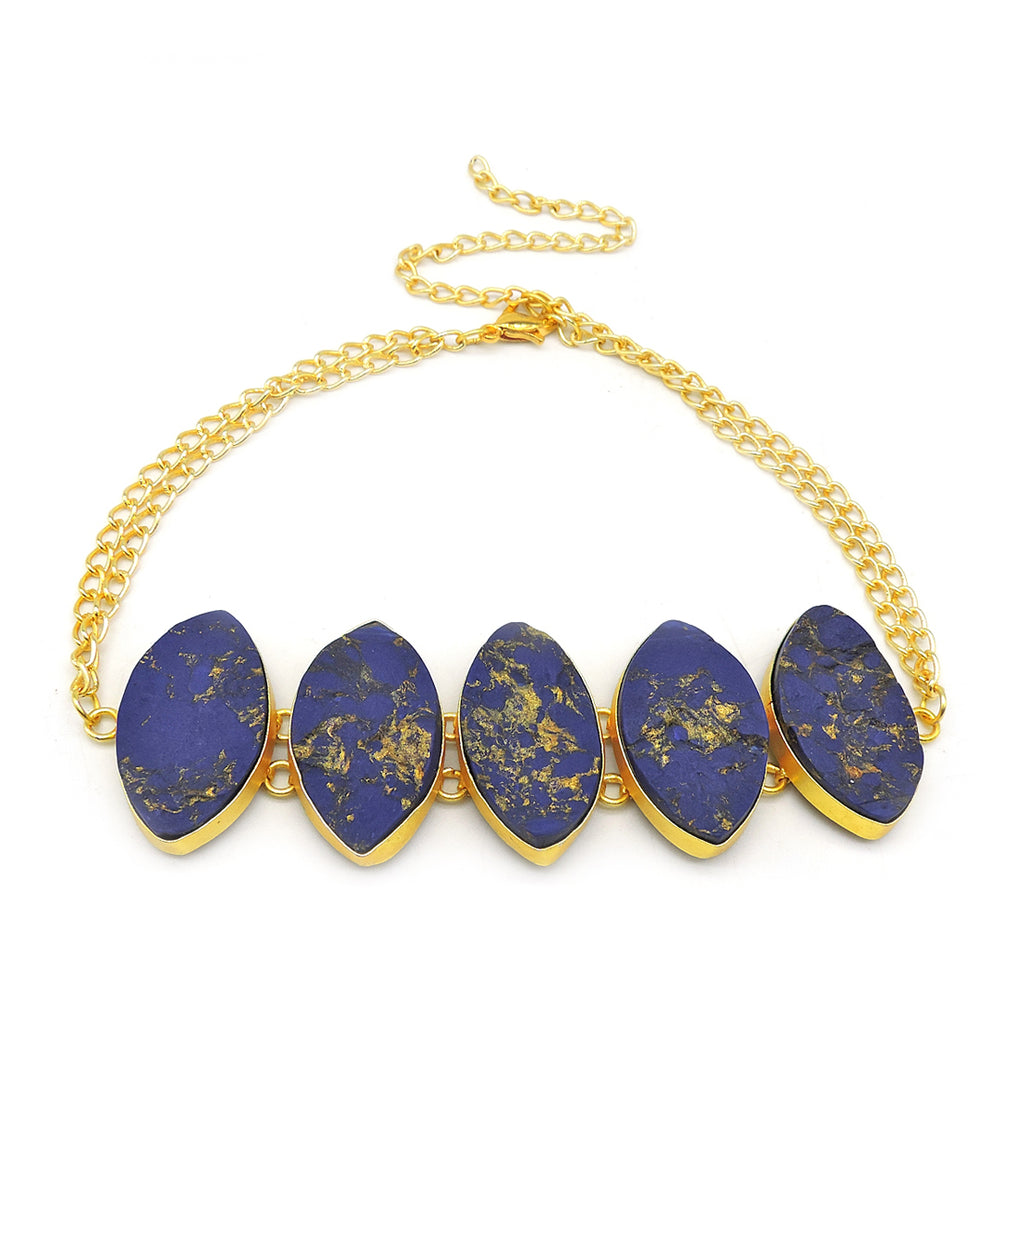 Blue Bhatti Necklace - Statement Necklaces - Gold-Plated & Hypoallergenic Jewellery - Made in India - Dubai Jewellery - Dori